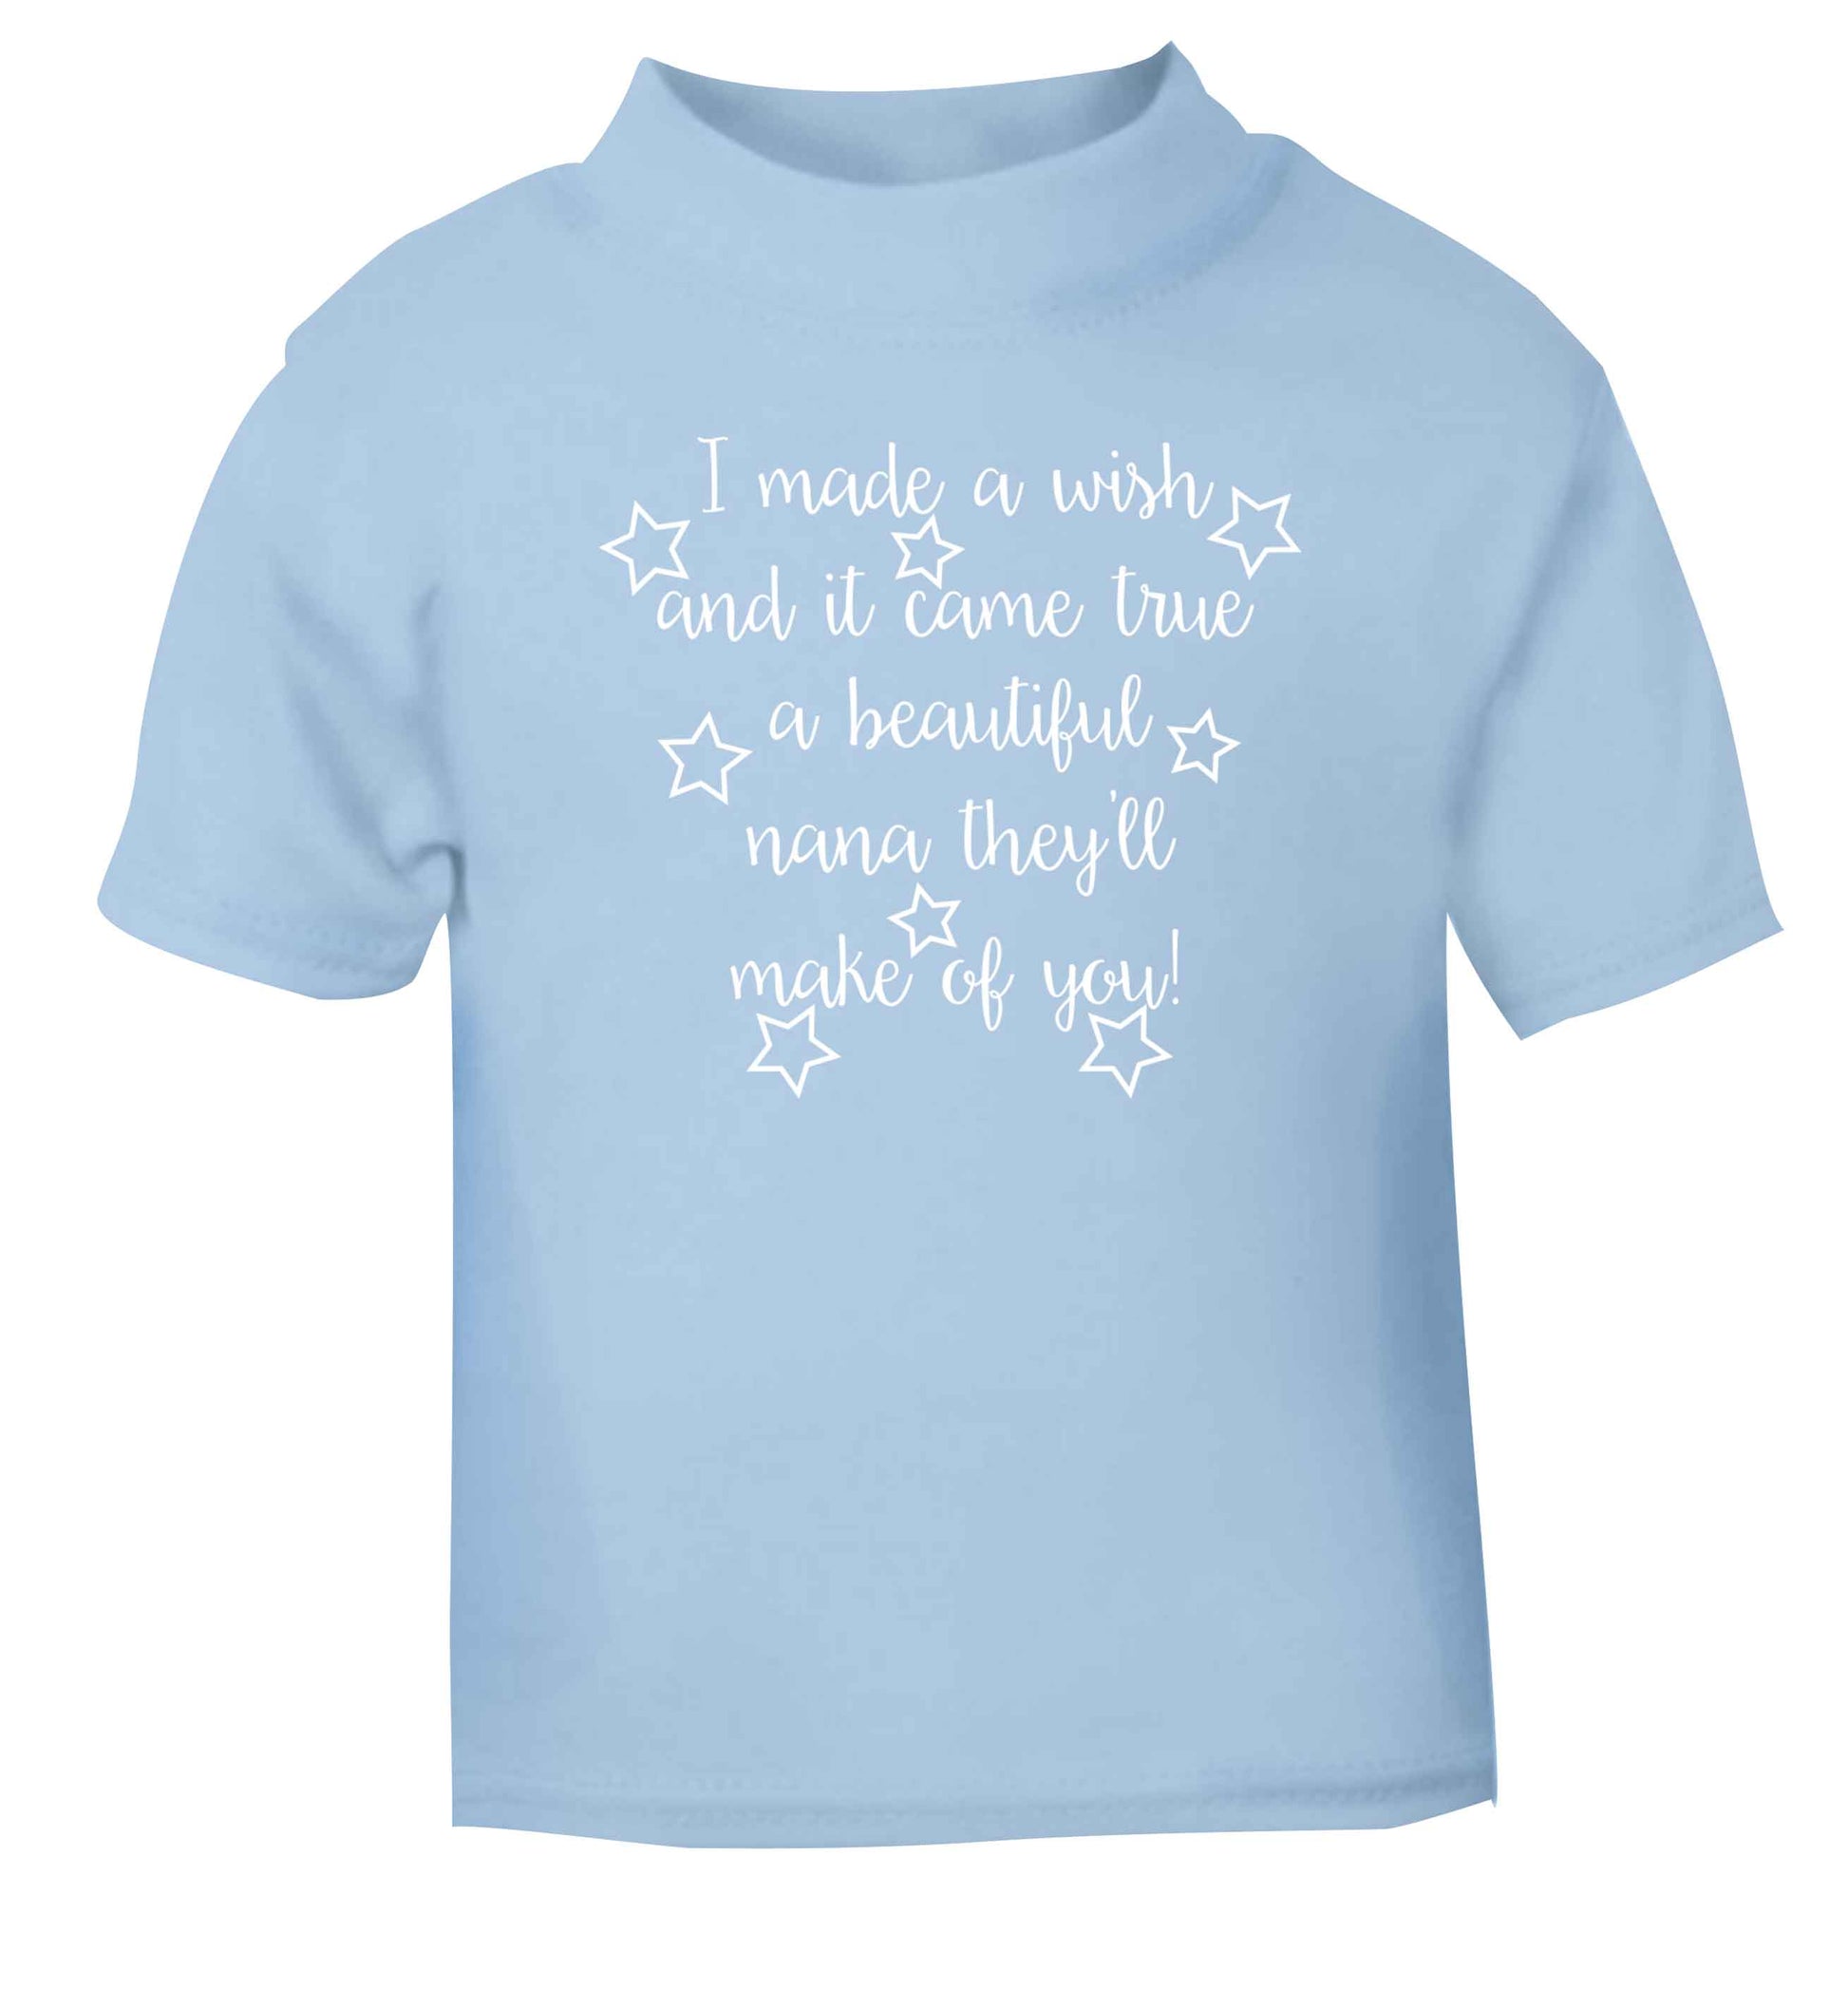 I made a wish and it came true a beautiful nana they'll make of you! light blue Baby Toddler Tshirt 2 Years